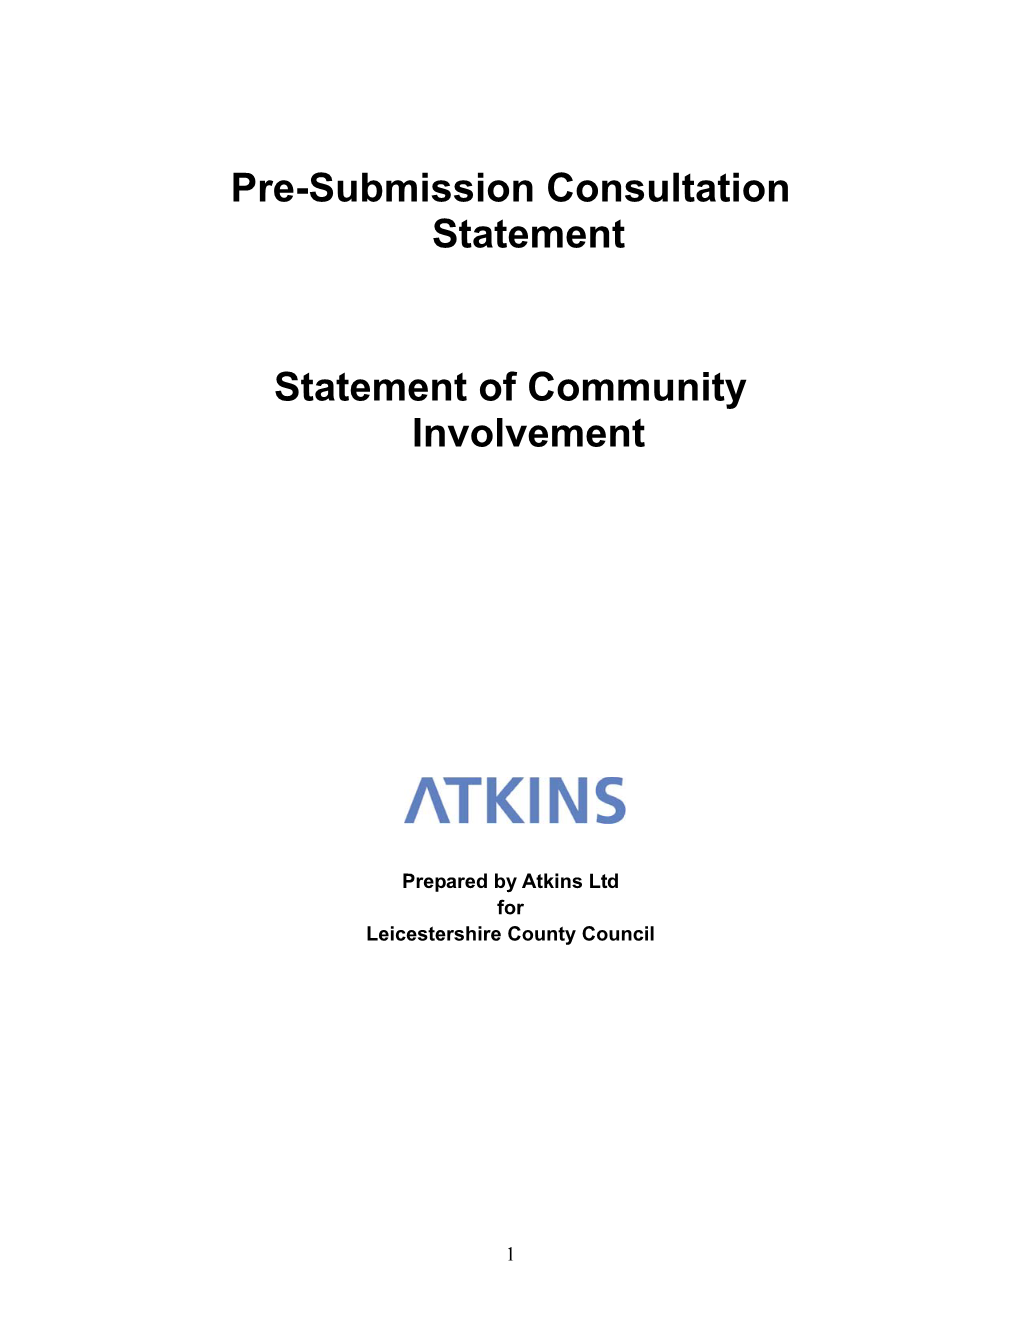 Pre-Submission Consultation Statement Statement of Community